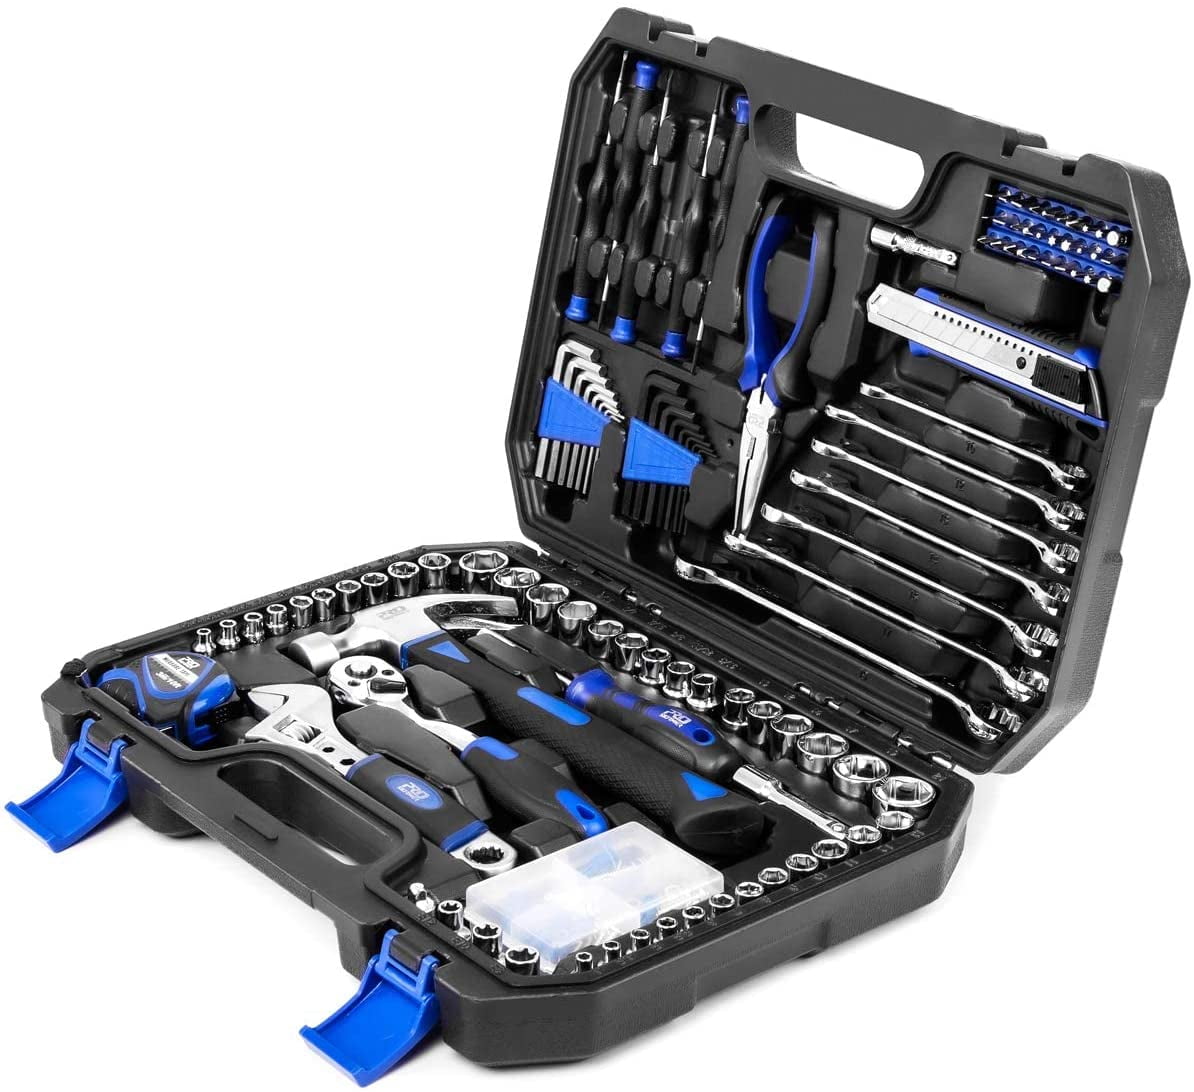 148-Piece Hand Tool Set, PROSTORMER Mixed Socket Wrench Household/Auto  Repair Tool Kit with Toolbox Storage Case for Mechanical Repair, DIY, Home  Maintenance 